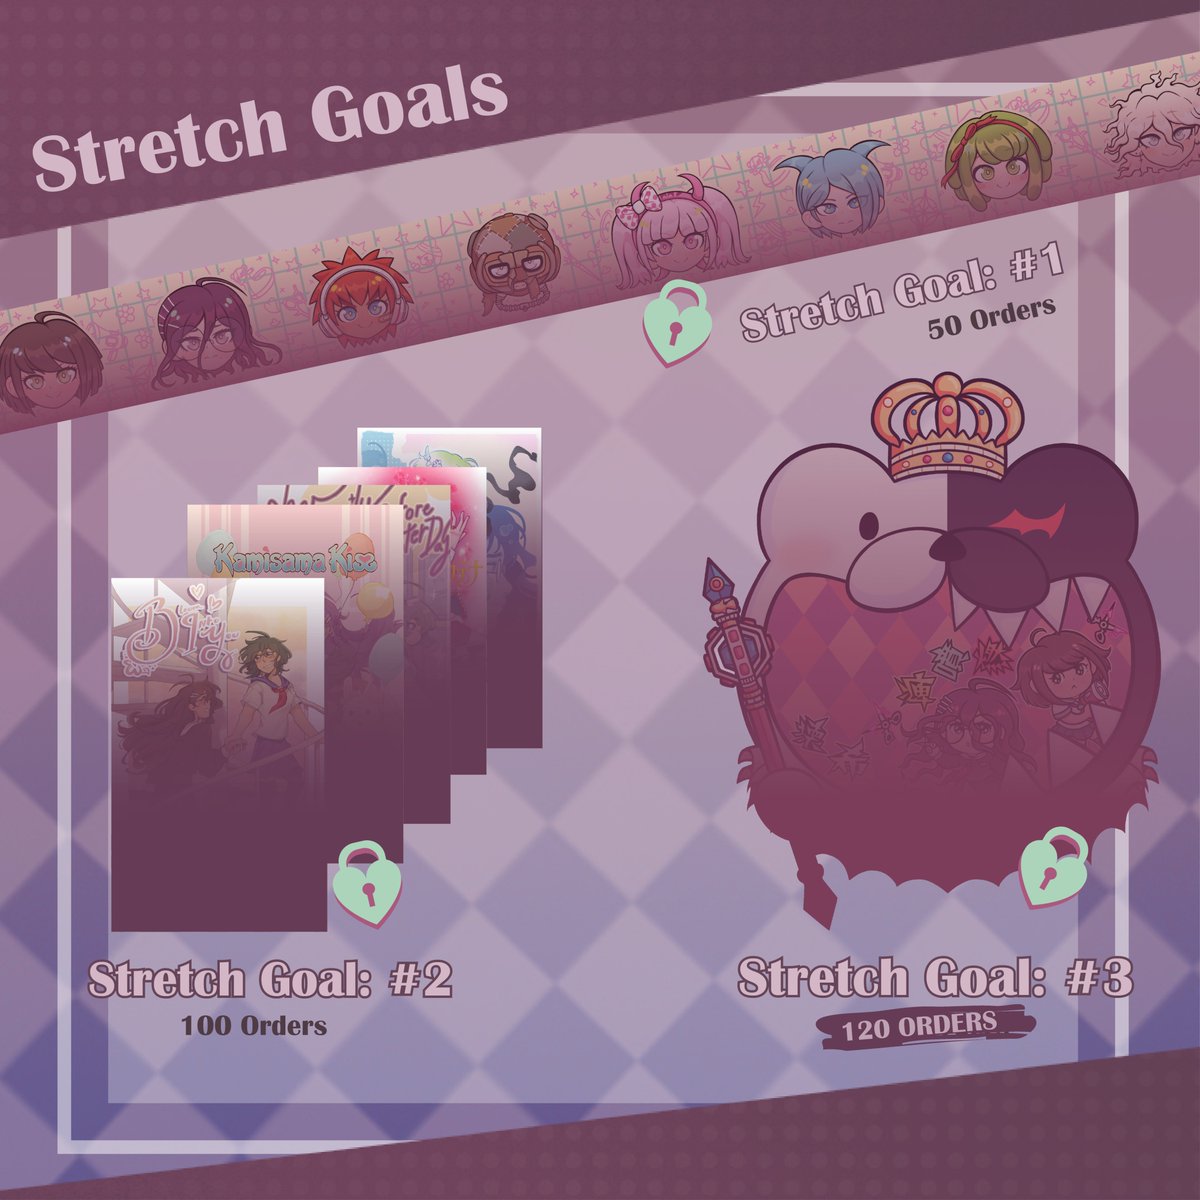 💜Update💚 We've decided to adjust our stretch goals a bit, our new highest tier will now be 120 orders! Thanks to all of our supporters and buyers, we have around 95 orders. Please help us reach the zine's full potential, with all our goals, as we close in the next few weeks!